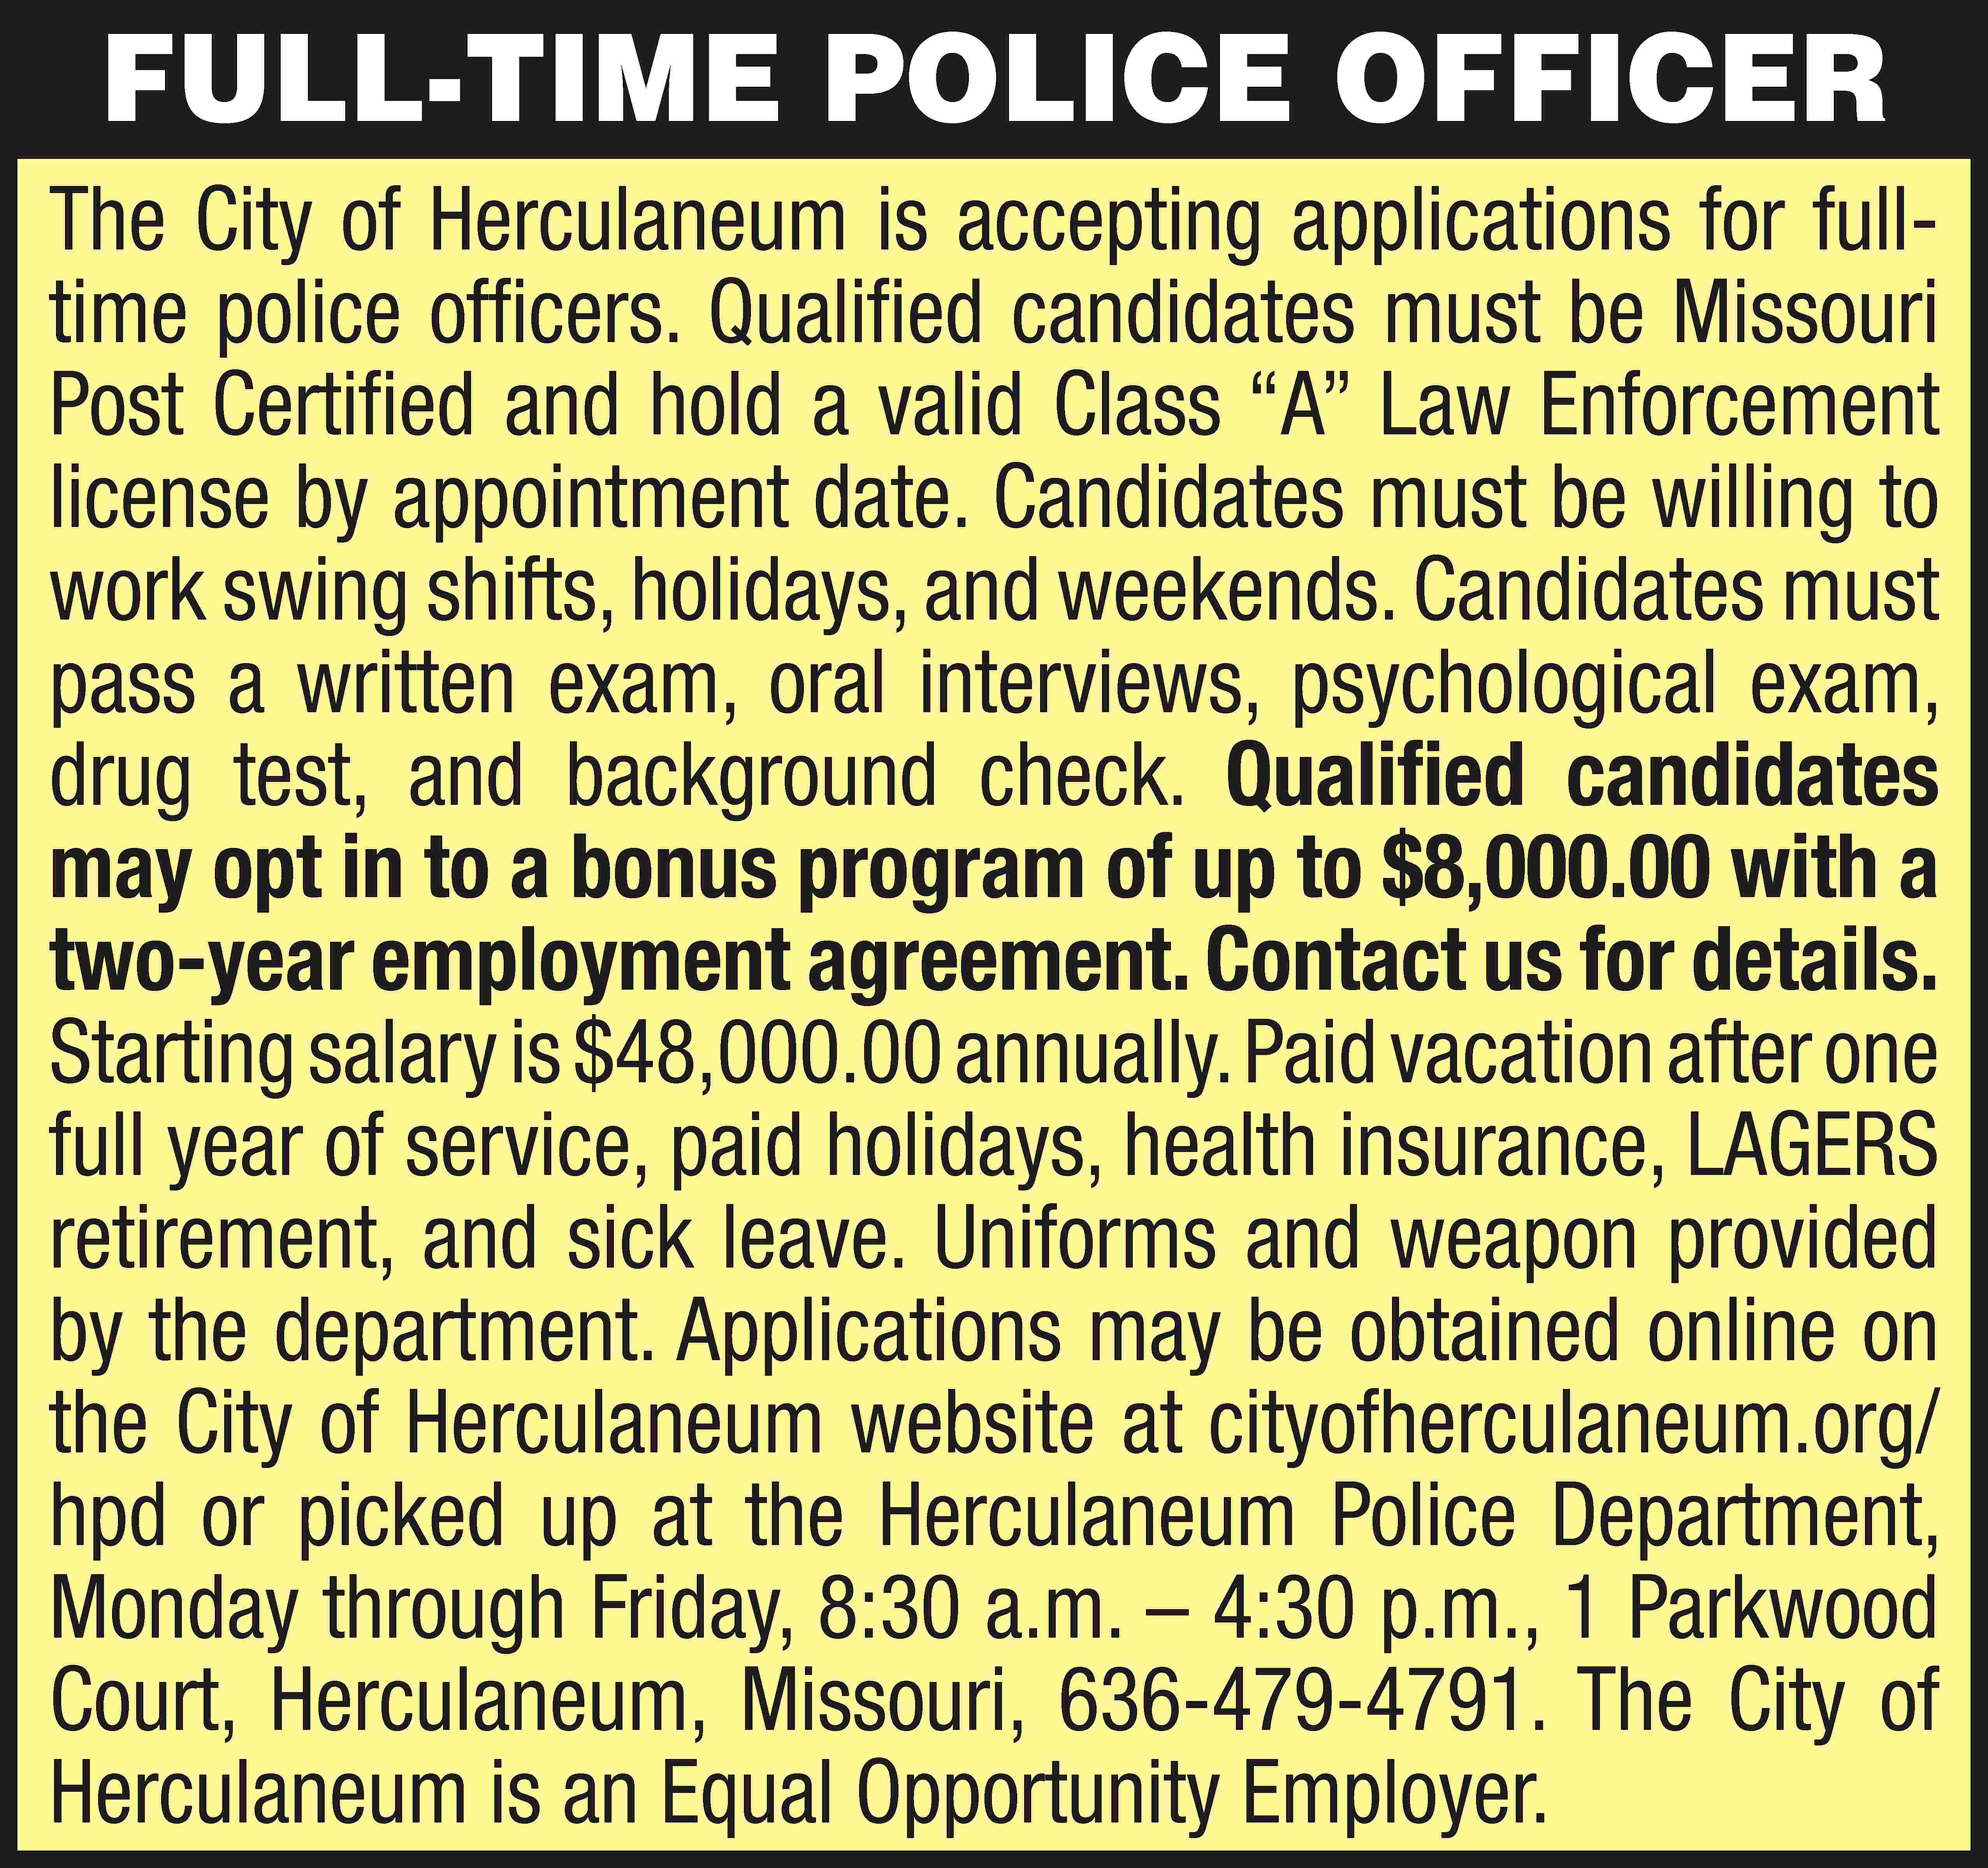 FULL-TIME POLICE OFFICER The City  FULL-TIME POLICE OFFICER The City of Herculaneum is accepting applications for fulltime police officers. Qualified candidates must be Missouri Post Certified and hold a valid Class “A” Law Enforcement license by appointment date. Candidates must be willing to work swing shifts, holidays, and weekends. Candidates must pass a written exam, oral interviews, psychological exam, drug test, and background check. Qualified candidates may opt in to a bonus program of up to $8,000.00 with a two-year employment agreement. Contact us for details. Starting salary is $48,000.00 annually. Paid vacation after one full year of service, paid holidays, health insurance, LAGERS retirement, and sick leave. Uniforms and weapon provided by the department. Applications may be obtained online on the City of Herculaneum website at cityofherculaneum.org/ hpd or picked up at the Herculaneum Police Department, Monday through Friday, 8:30 a.m. – 4:30 p.m., 1 Parkwood Court, Herculaneum, Missouri, 636-479-4791. The City of Herculaneum is an Equal Opportunity Employer.